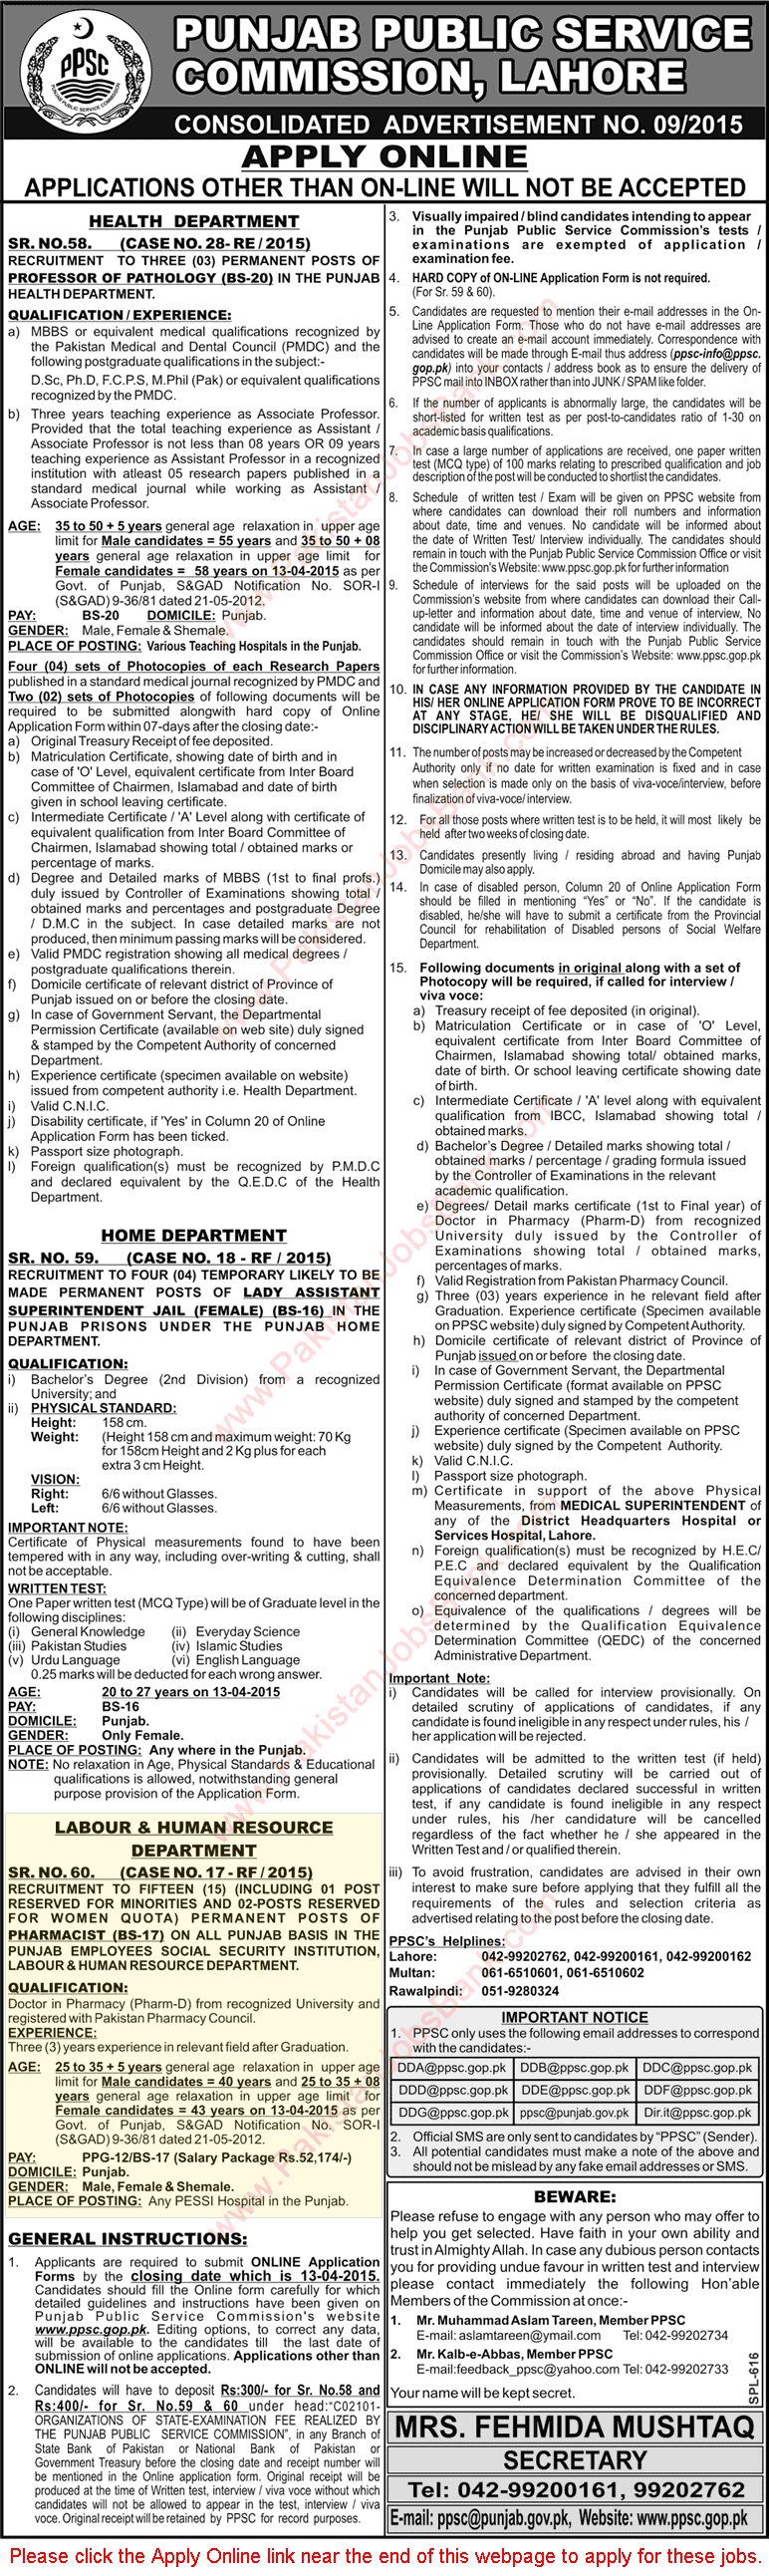 PPSC Pharmacist Jobs 2015 March / April PESSI Hospitals Labour & Human Resource Department